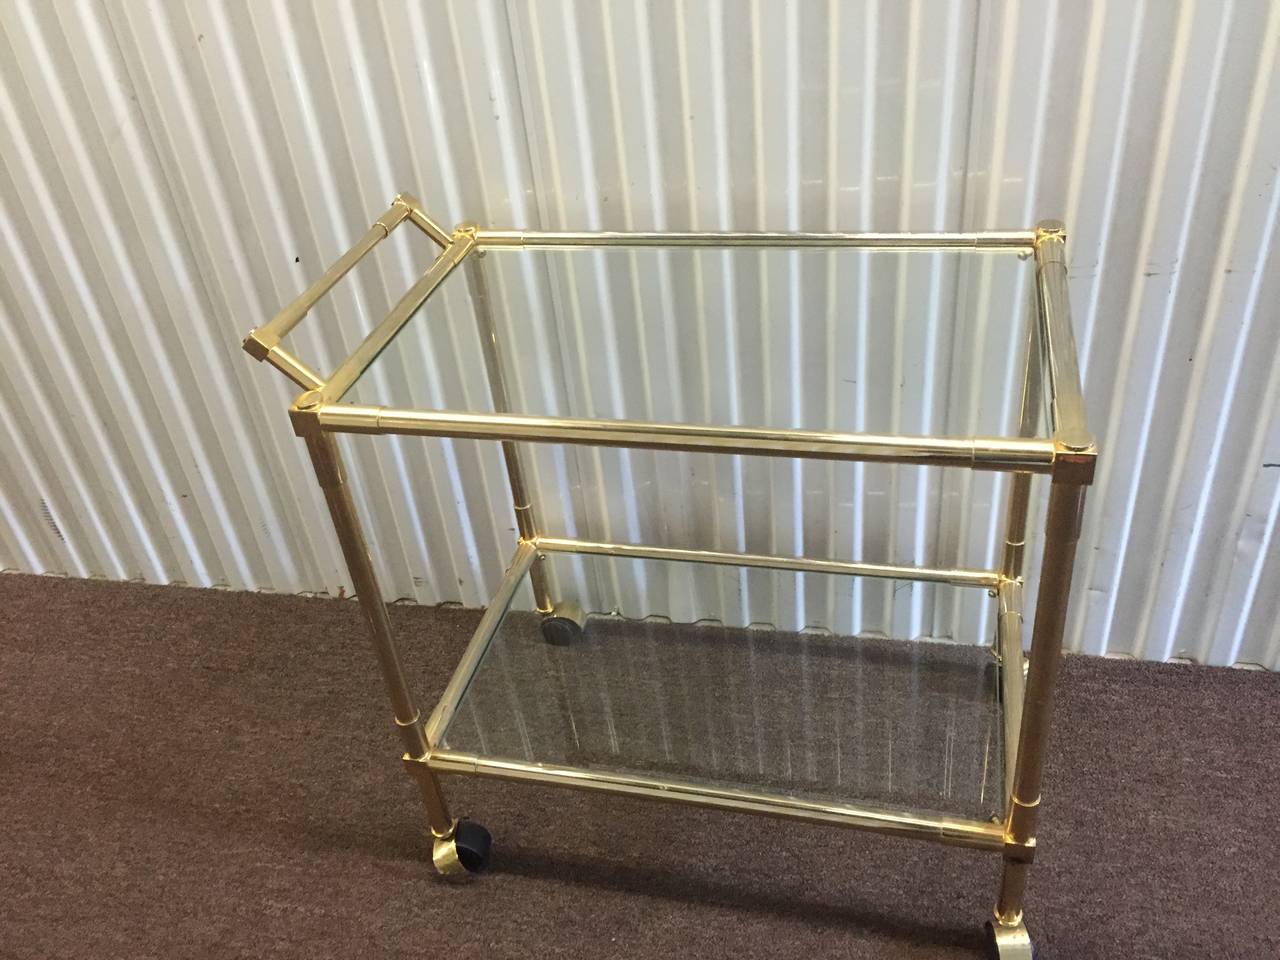 A vintage 1970s brass framed bar cart on casters with two glass shelves. Good vintage condition with age appropriate wear and patina.